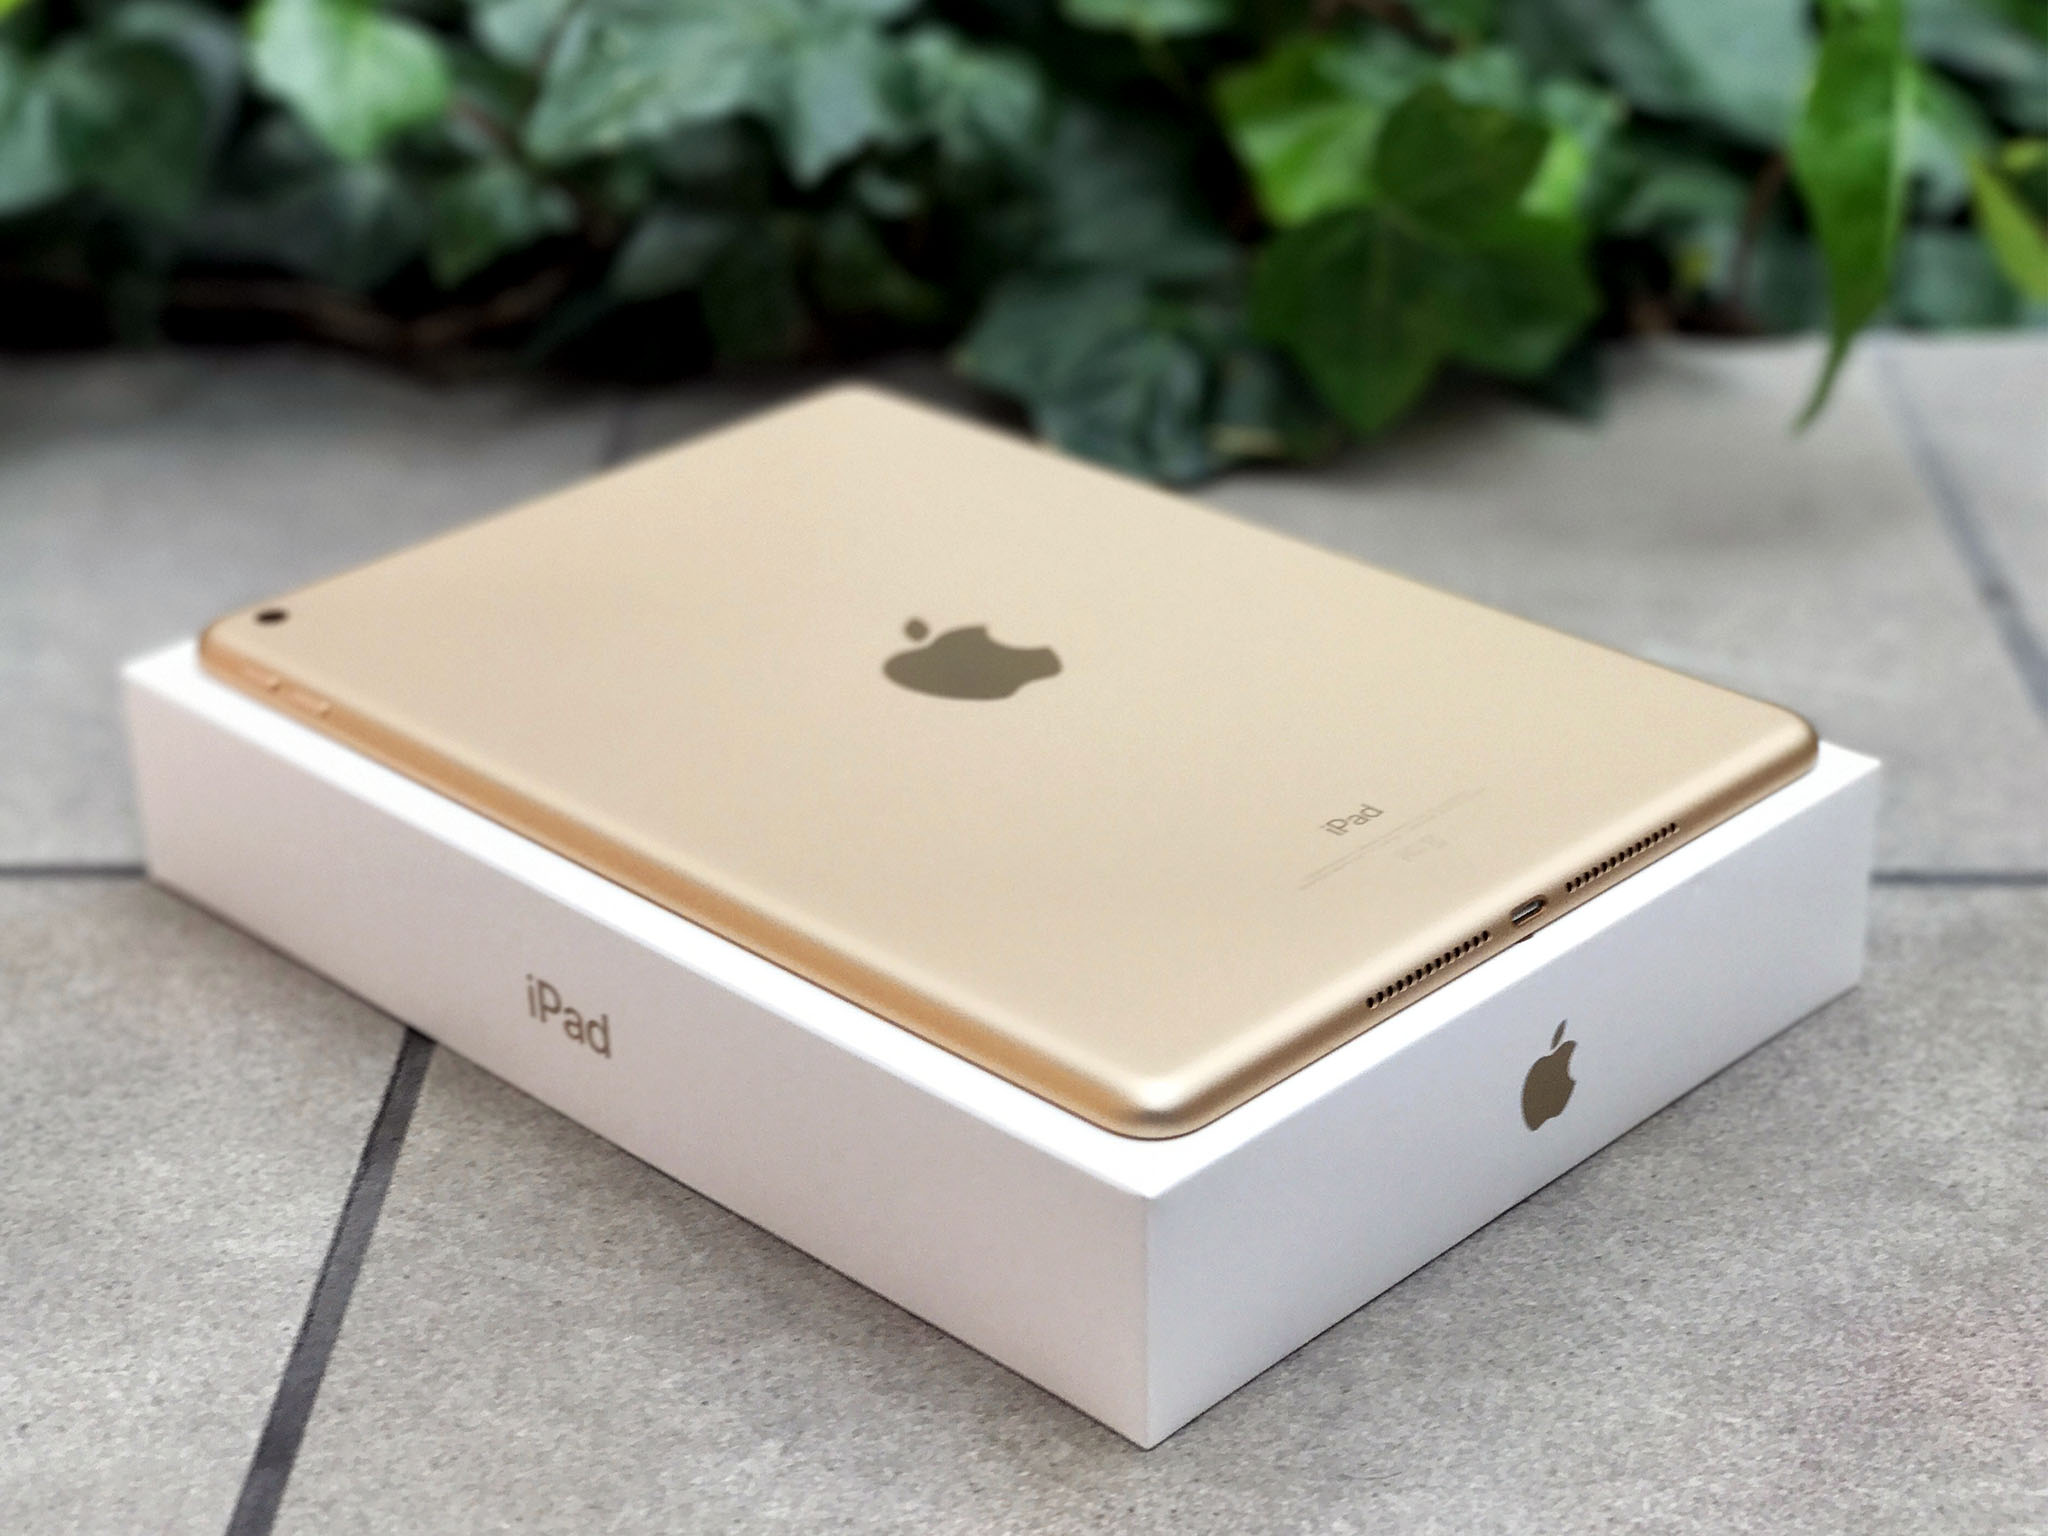 iPad (5th generation) review